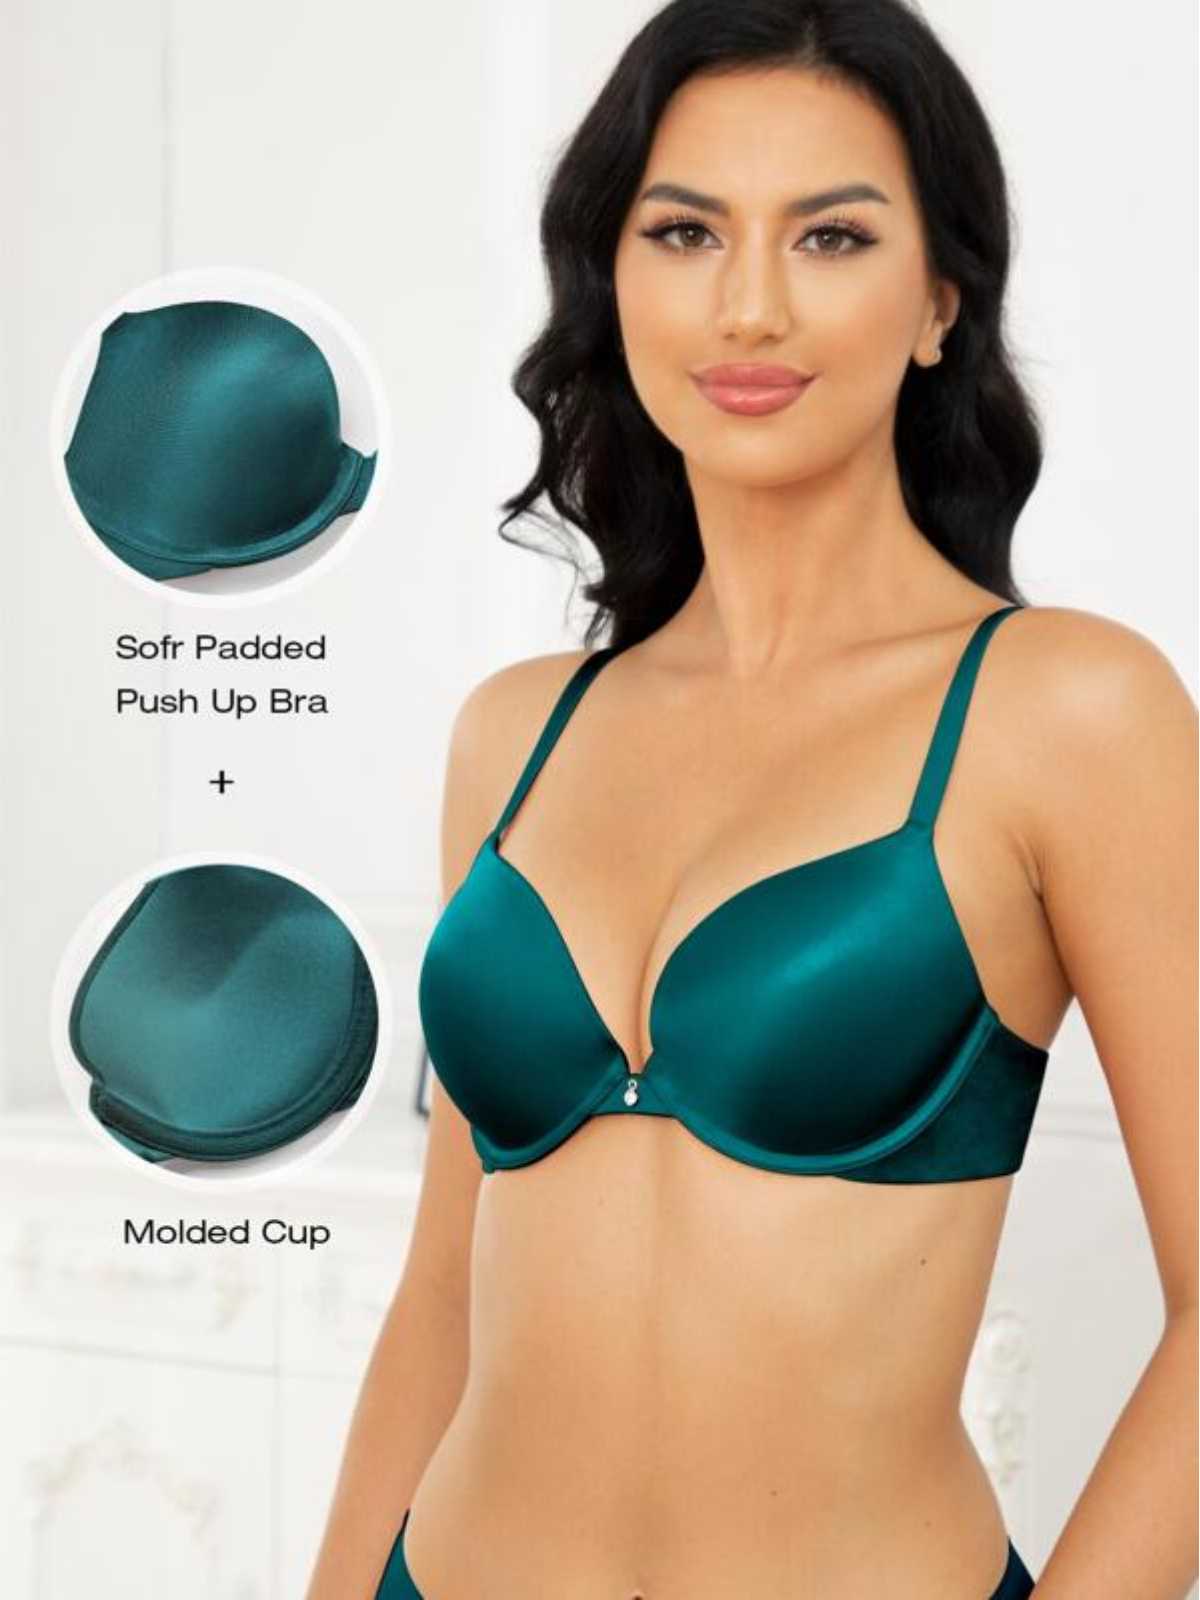 WingsLove: Push up bra,Up to 7 color schemes